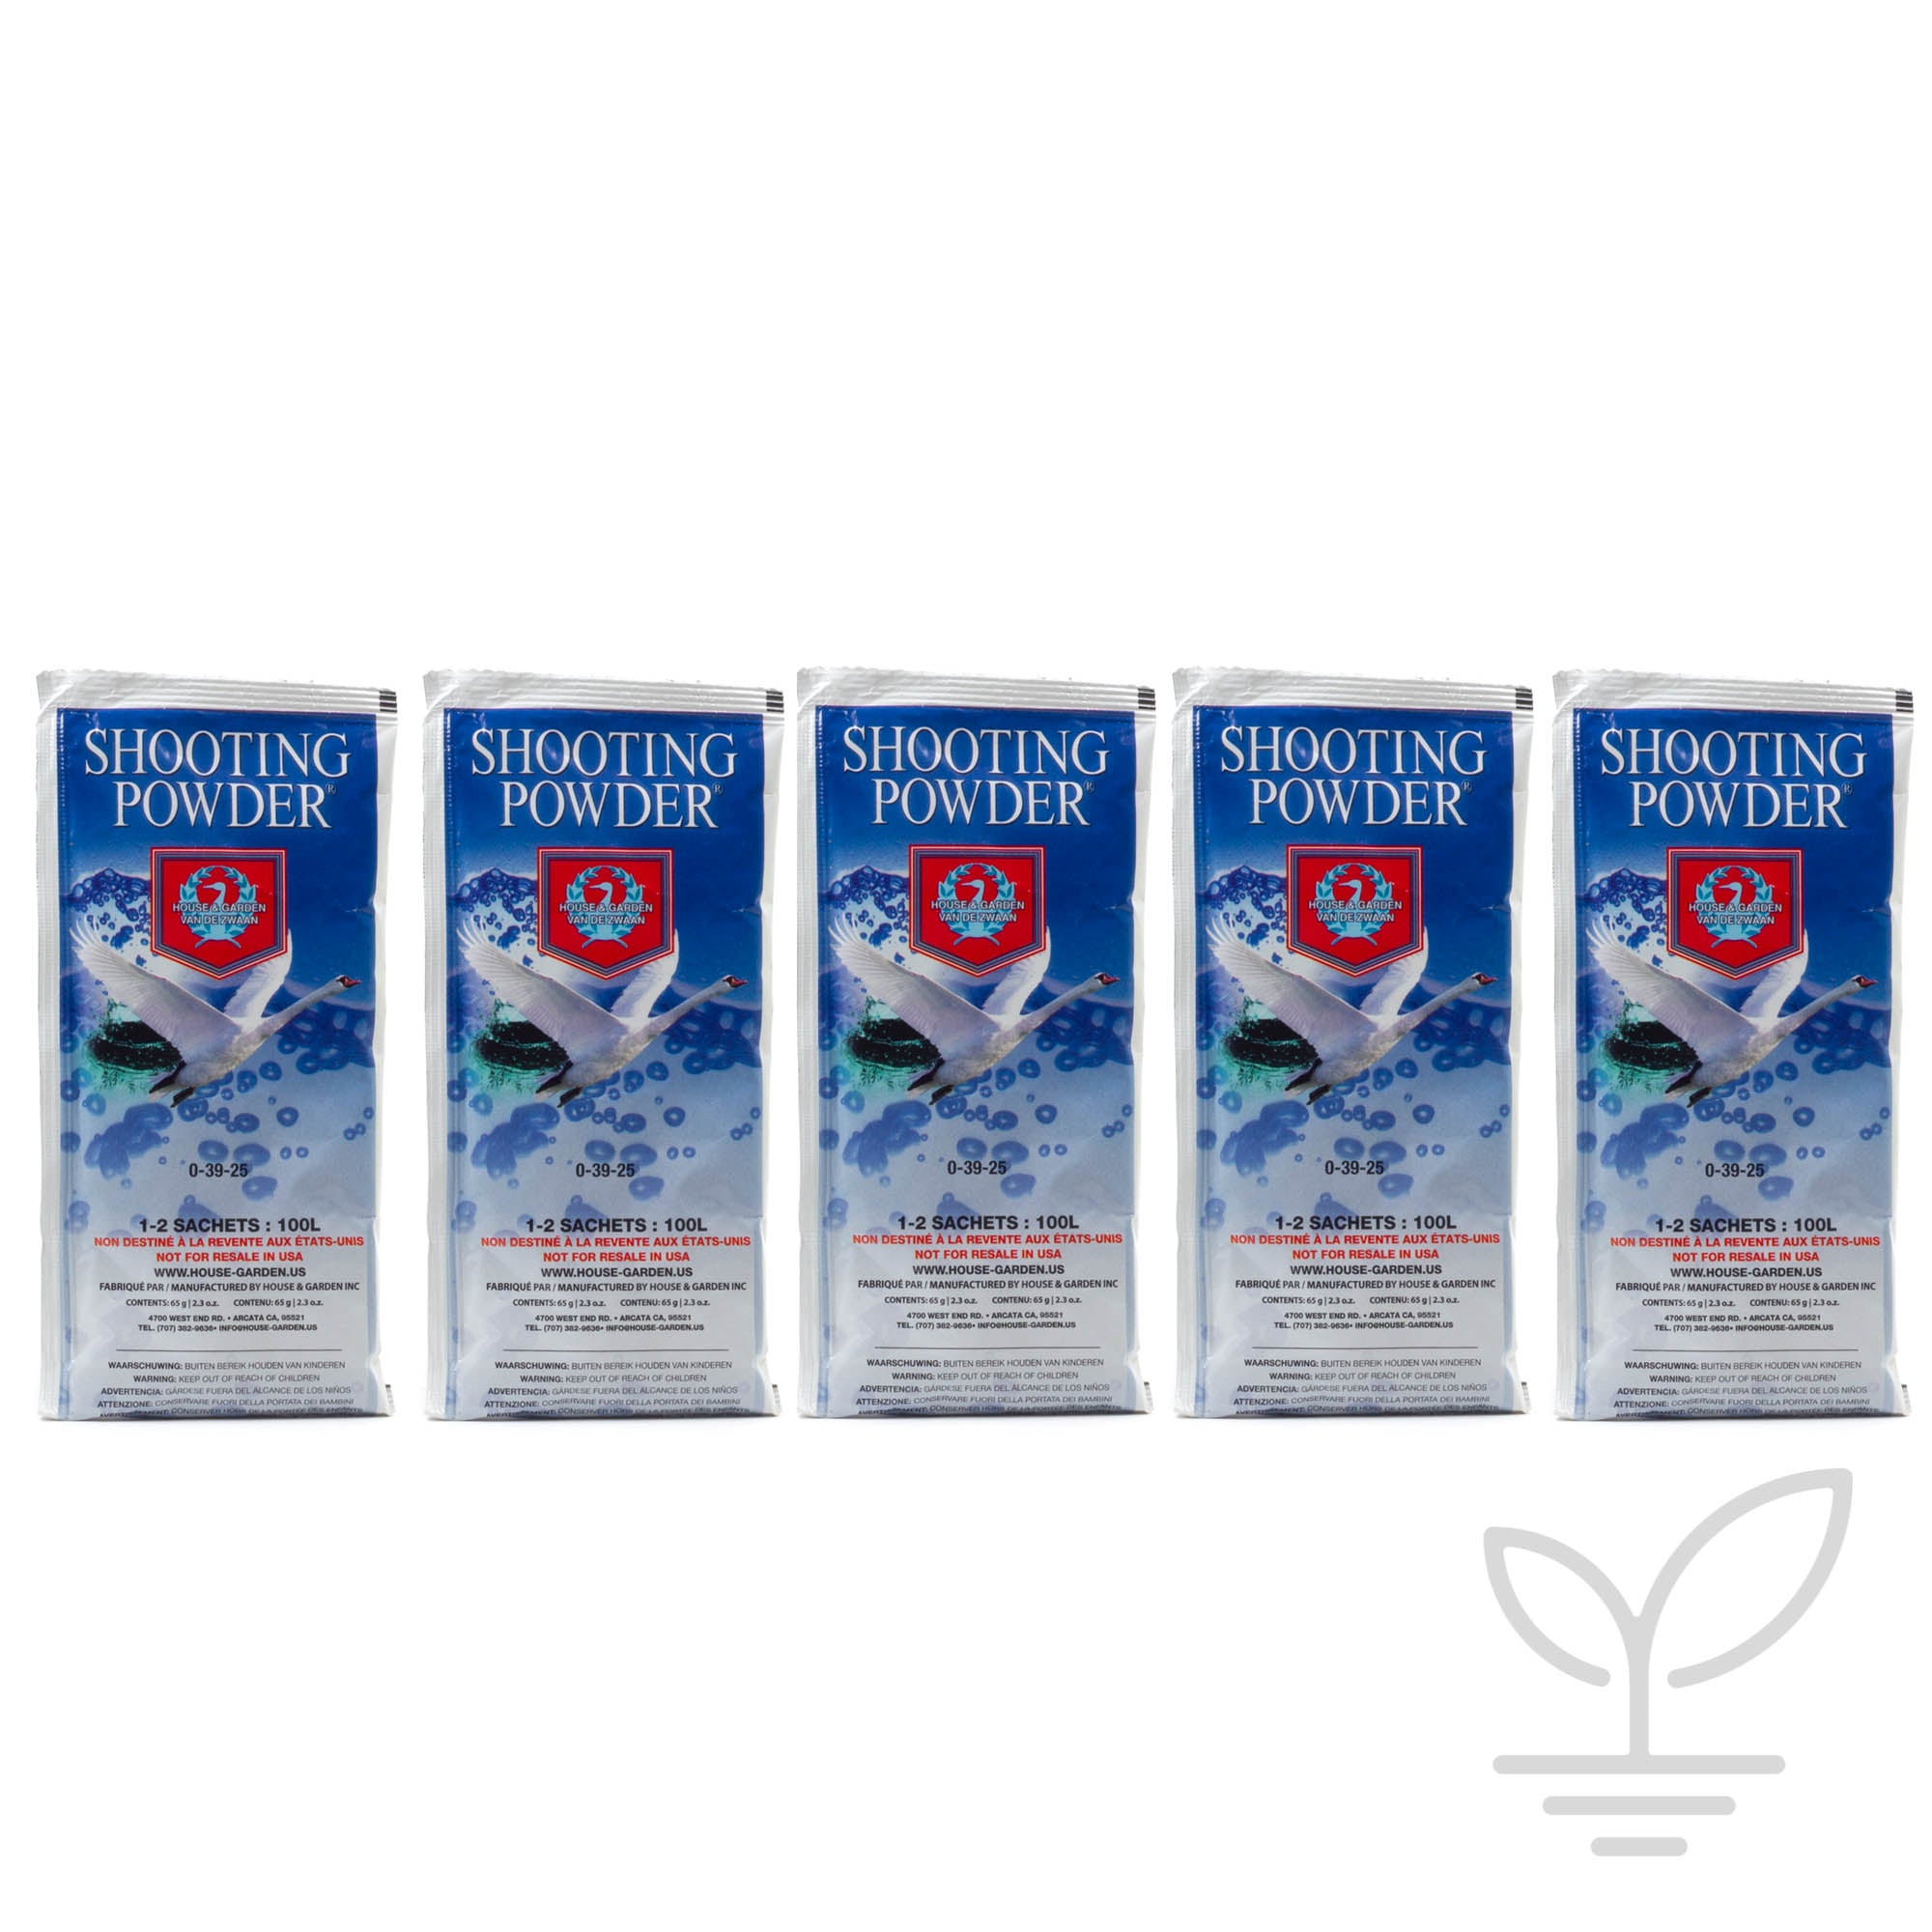 House And Garden - Shooting Powder 65g - 5 Pack